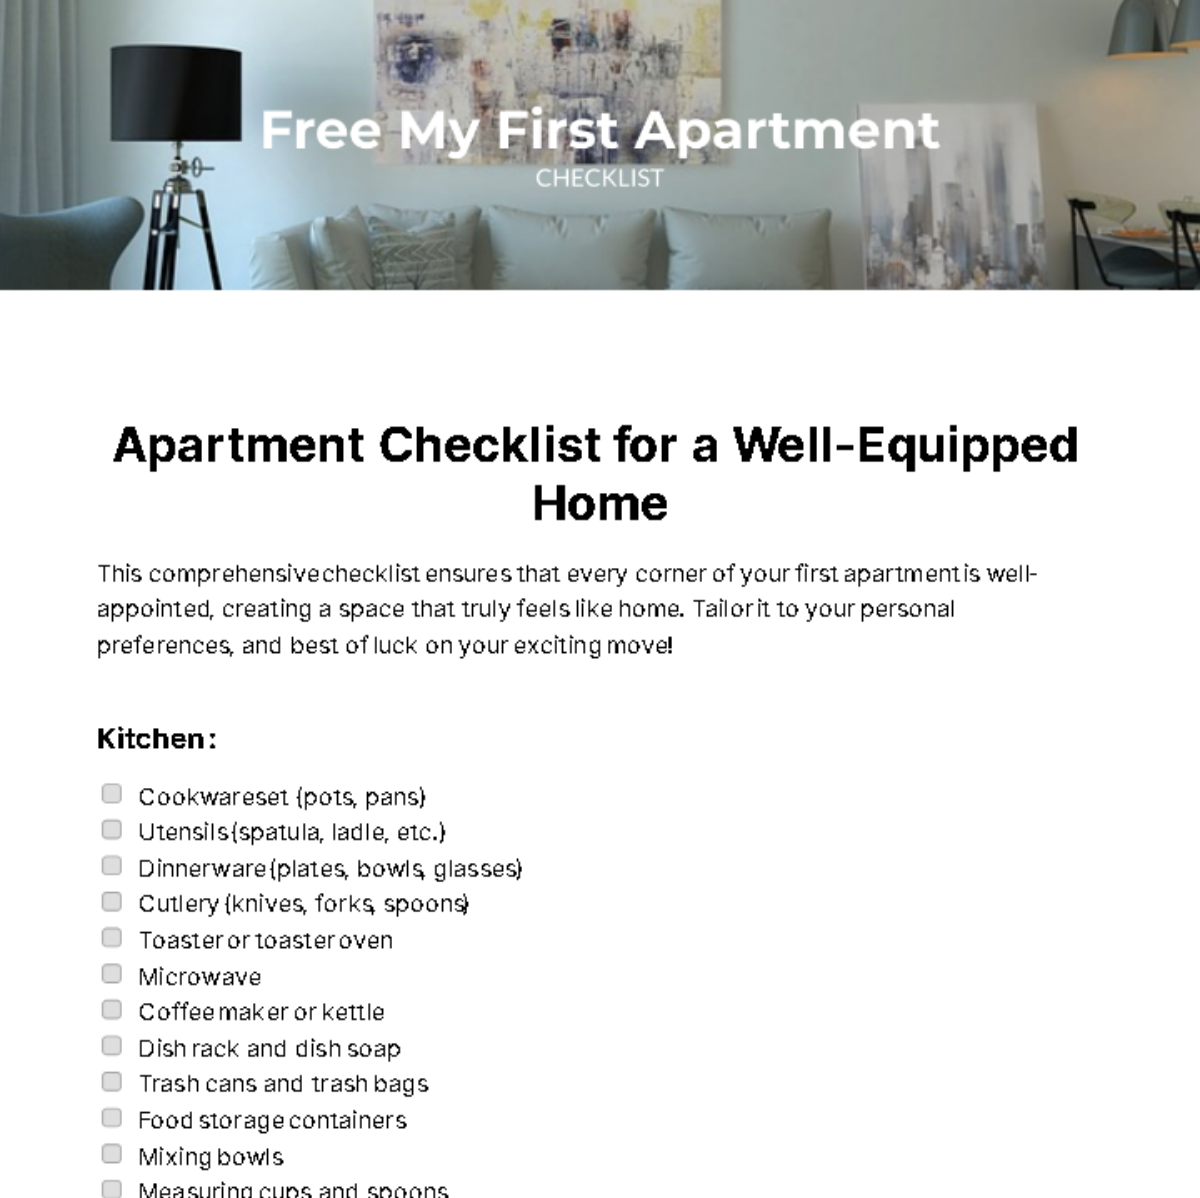 My First Apartment Checklist Template